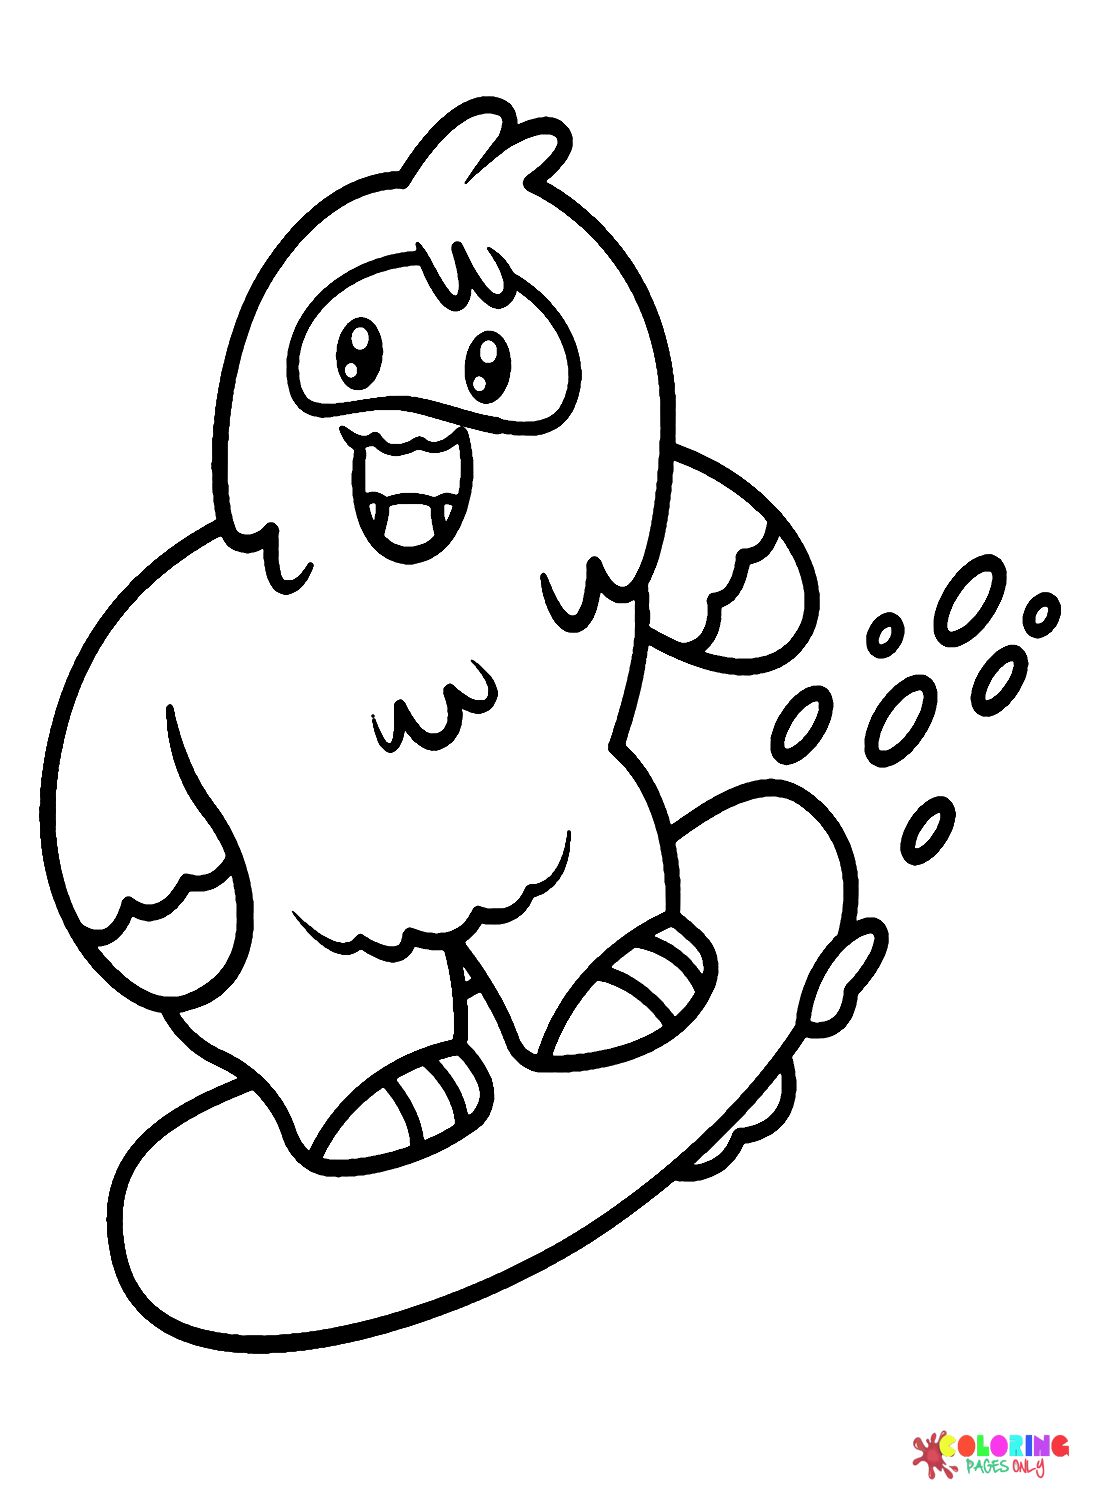 Yeti coloring pages printable for free download